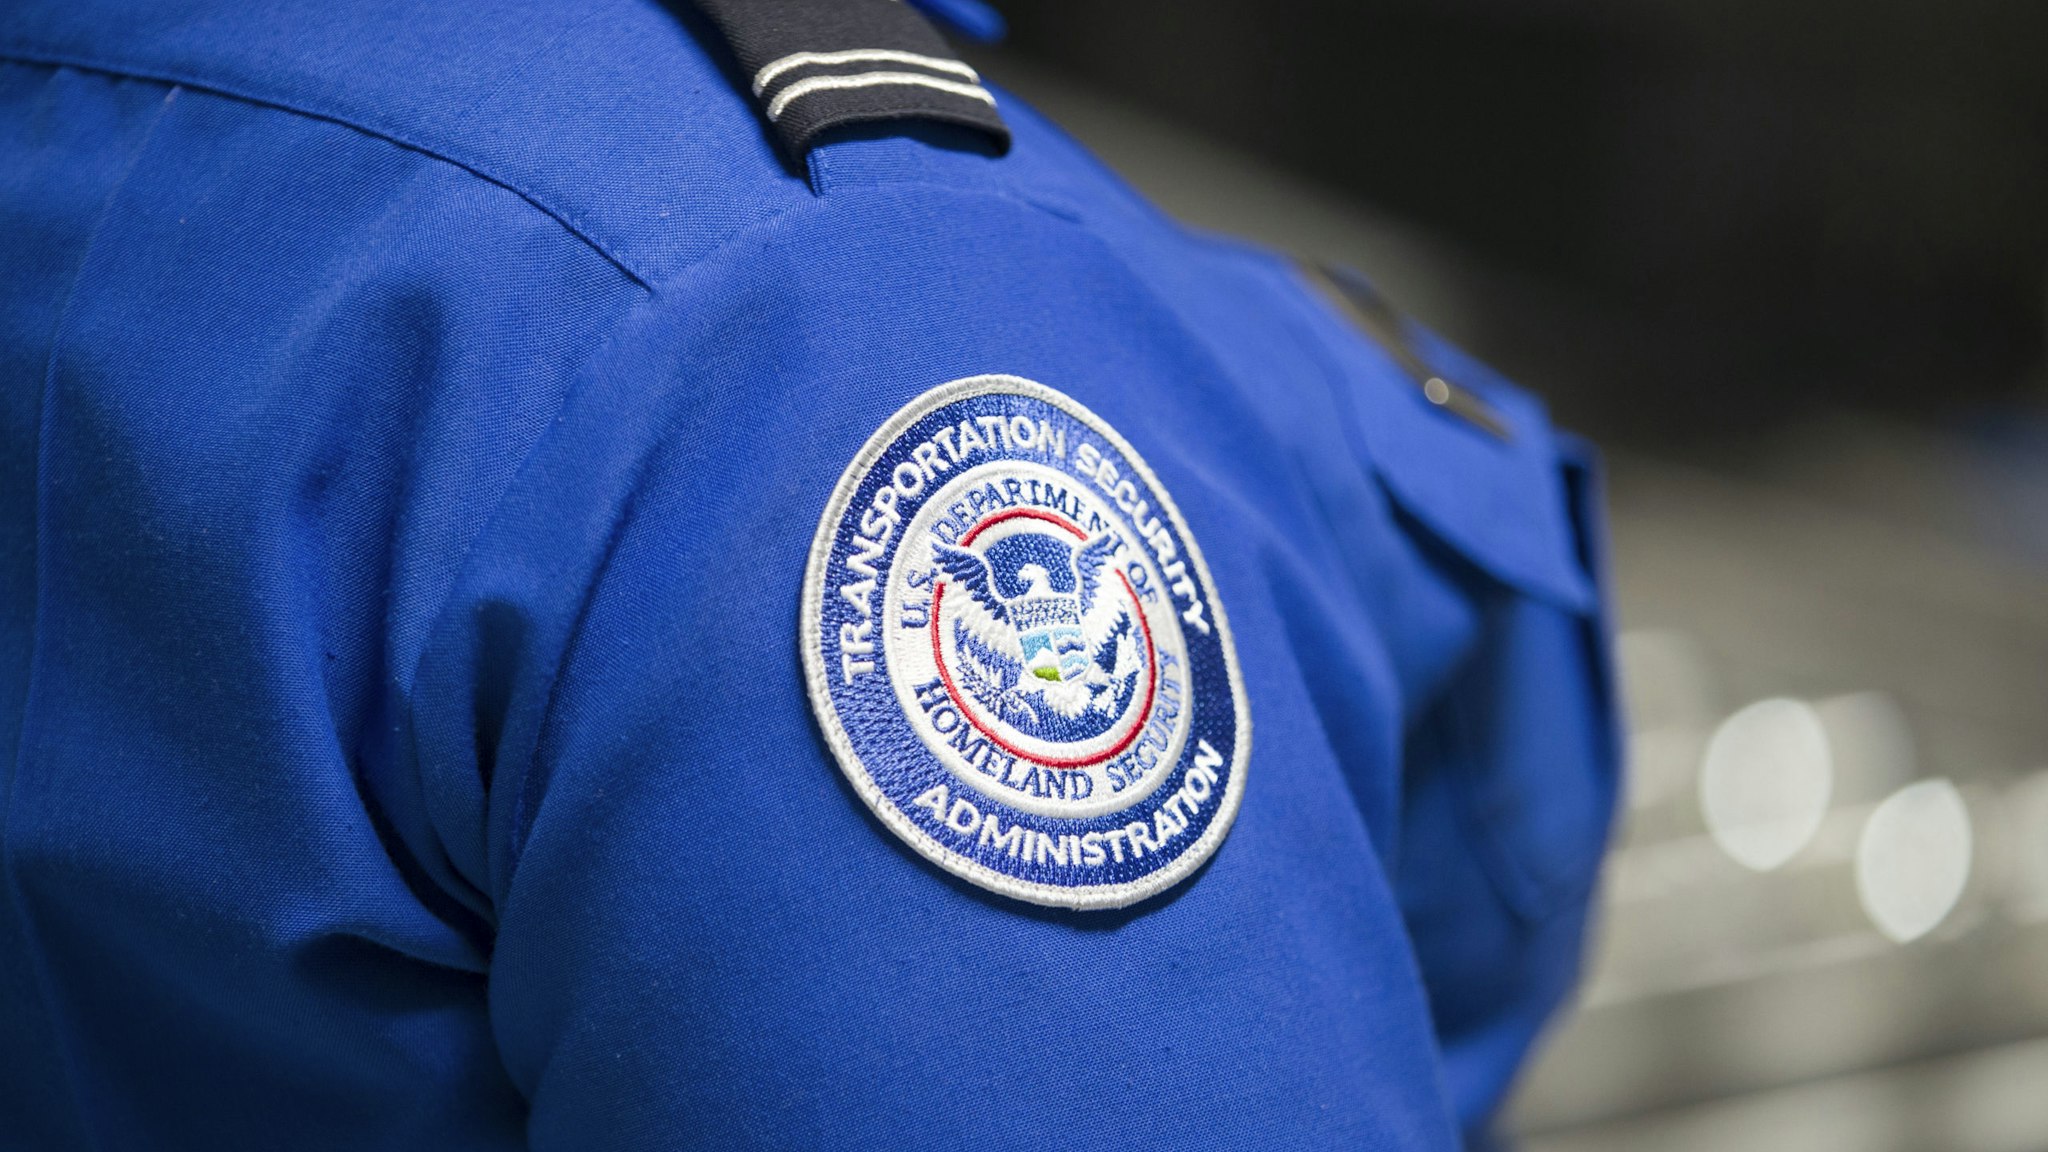 MIAMI, FLORIDA - MAY 21: A Transportation Security Administration (TSA) agent's patch is seen as she helps travelers place their bags through the 3-D scanner at the Miami International Airport on May 21, 2019 in Miami, Florida. TSA has begun using the new 3-D computed tomography (CT) scanner in a checkpoint lane to detect explosives and other prohibited items that may be inside carry-on bags. (Photo by Joe Raedle/Getty Images)